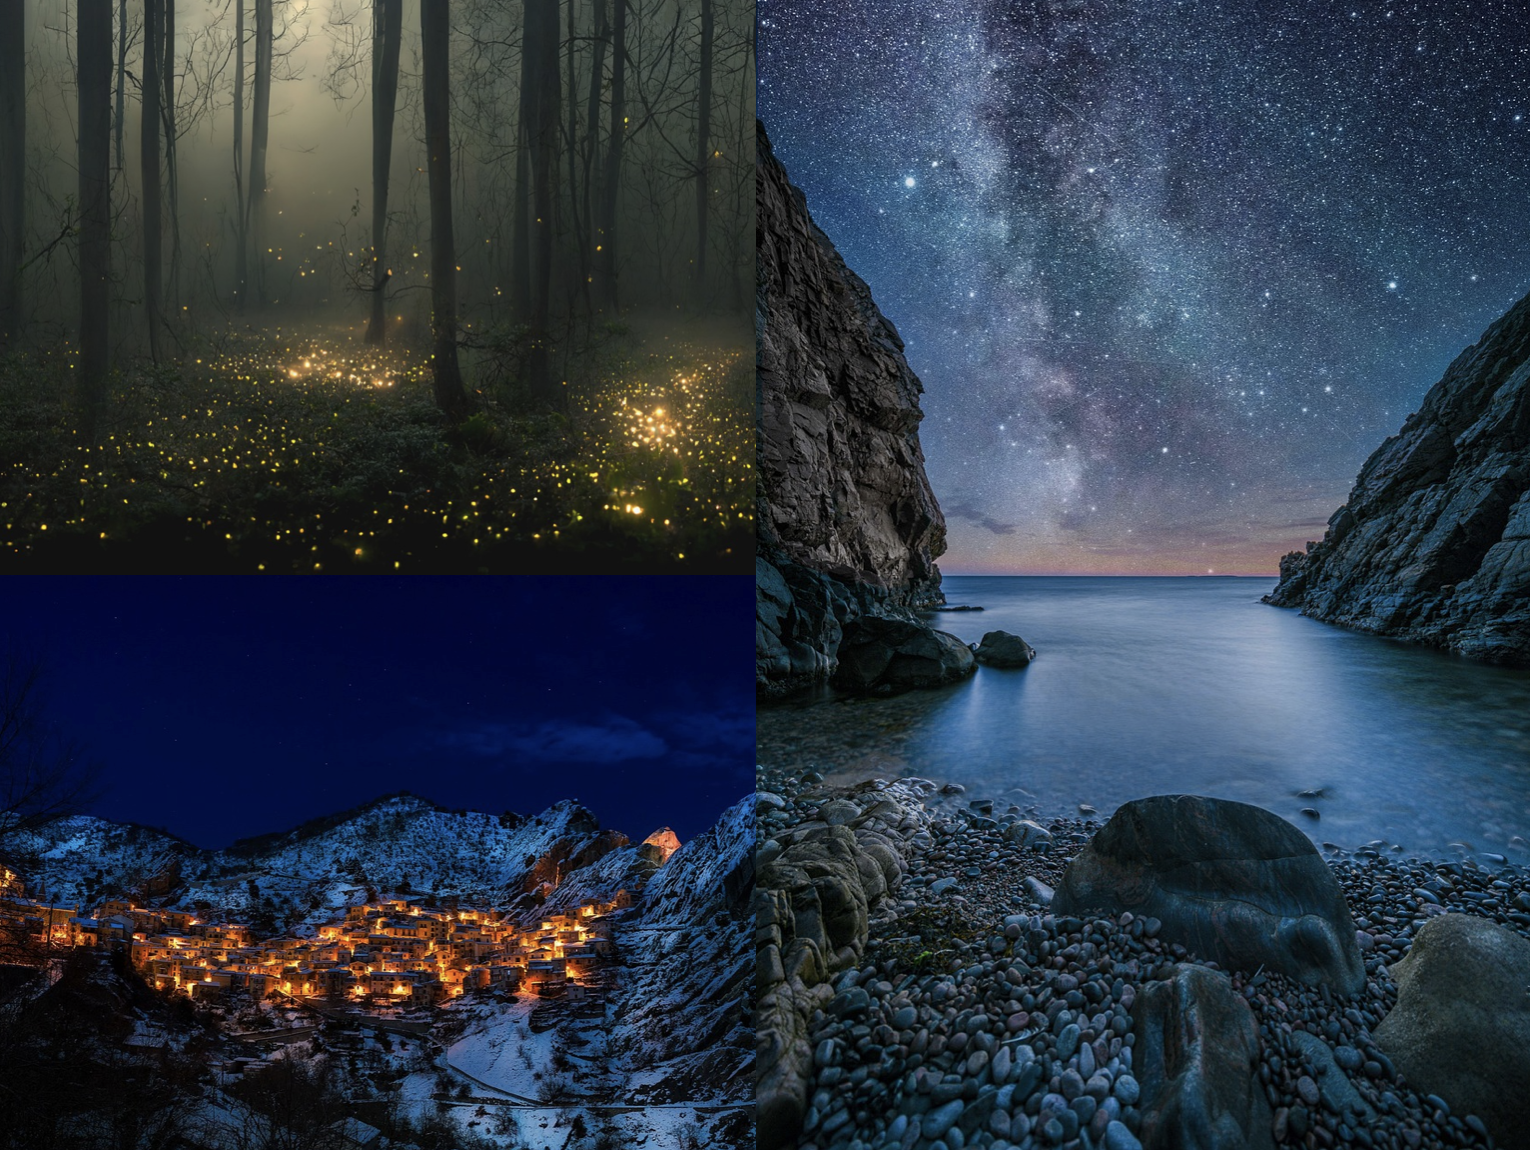 three photos - one of fireflies in a forest, one of a hill with glowing homes, and one of a view of a starry sky from a small inlet